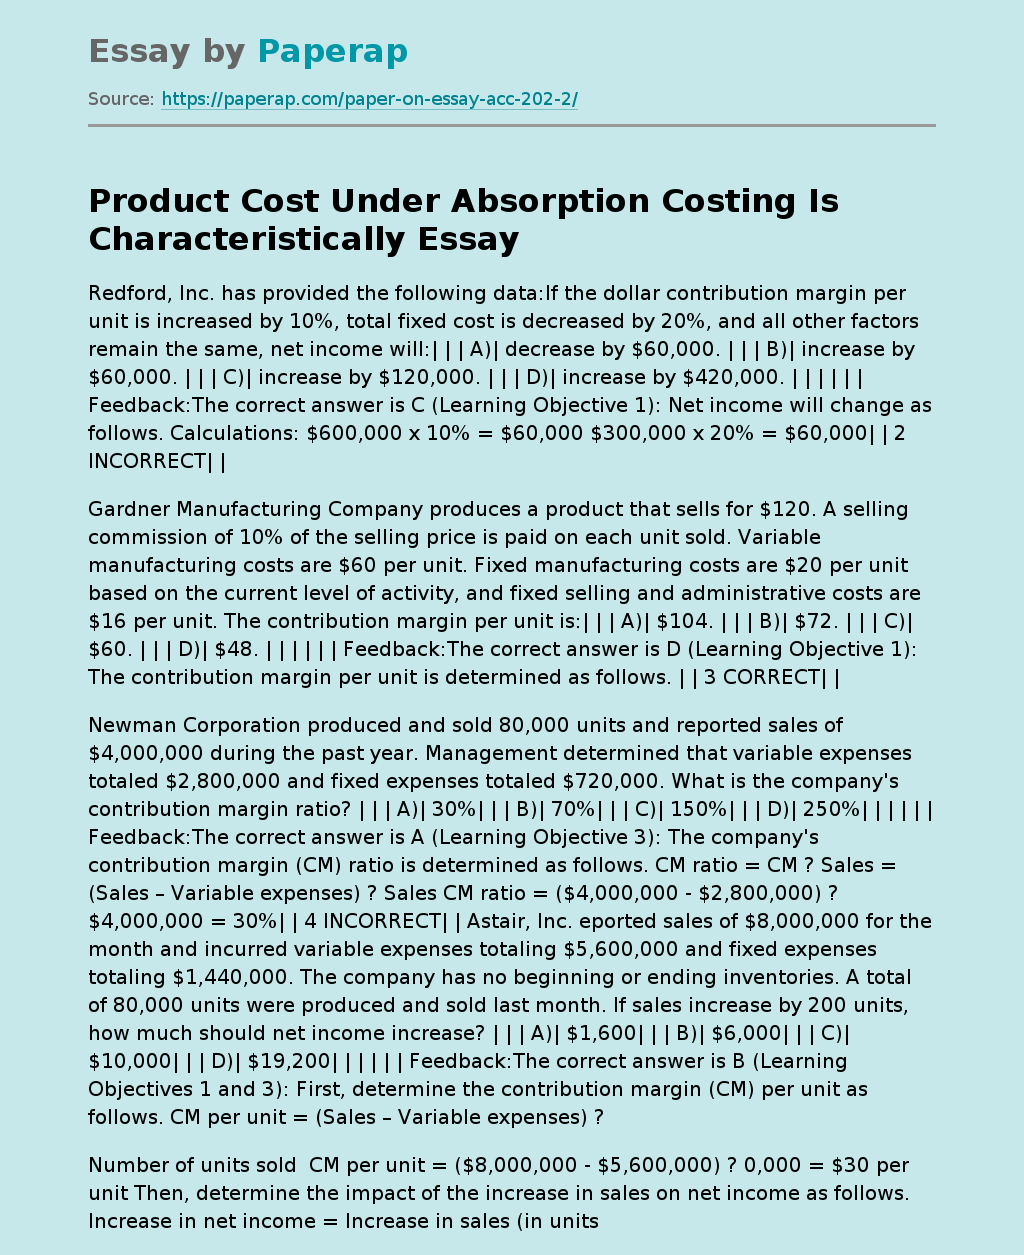 Product Cost Under Absorption Costing Is Characteristically